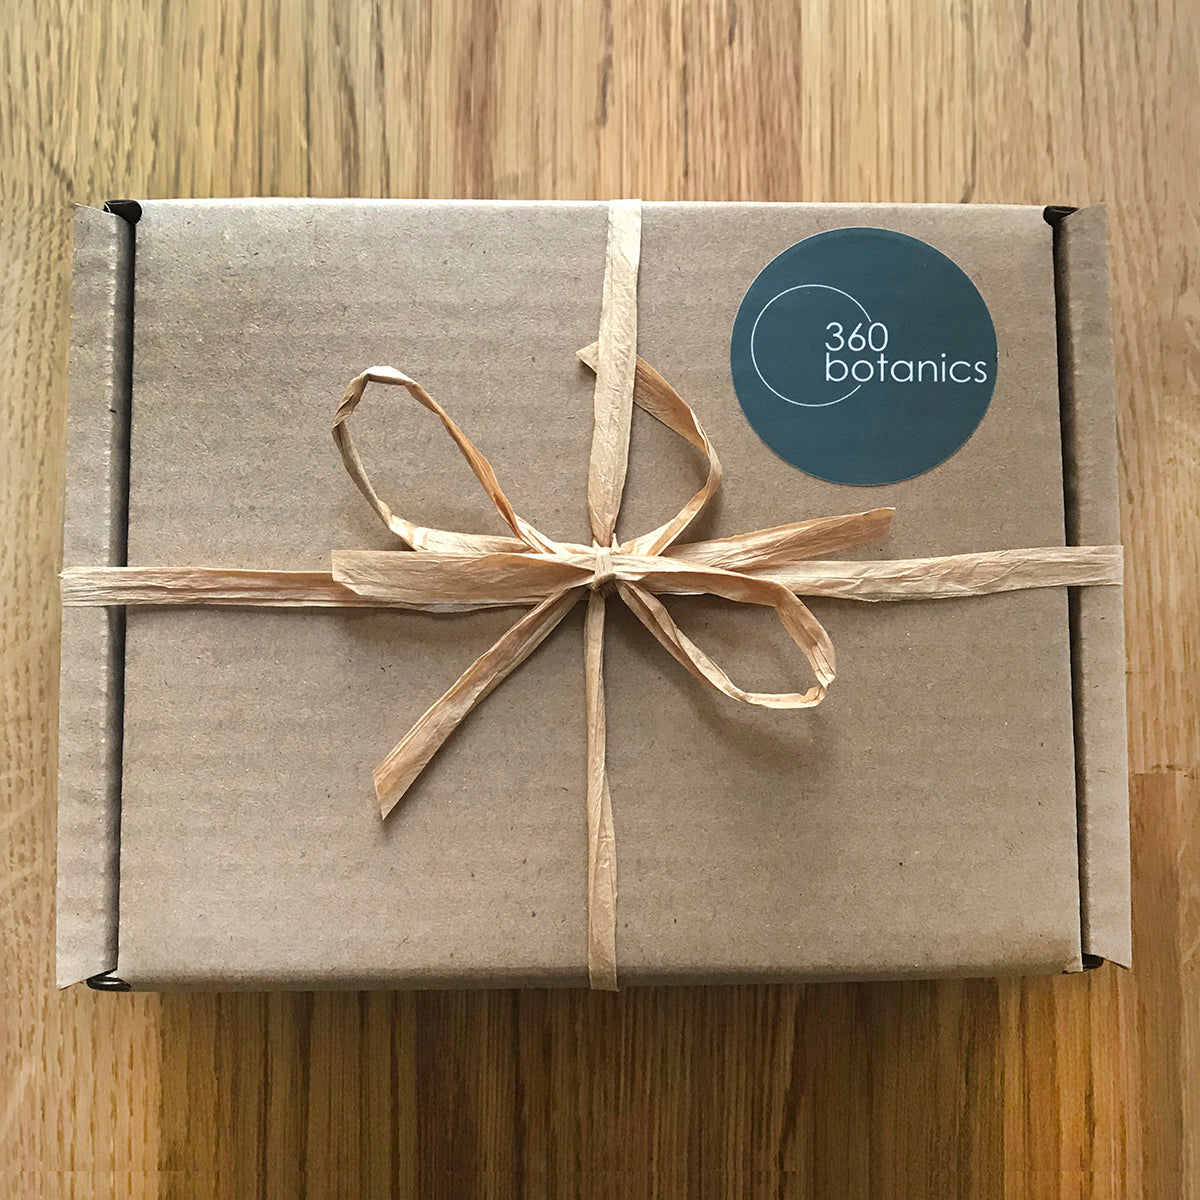 cardboard eco gift box tied with ribbon on wooden surface